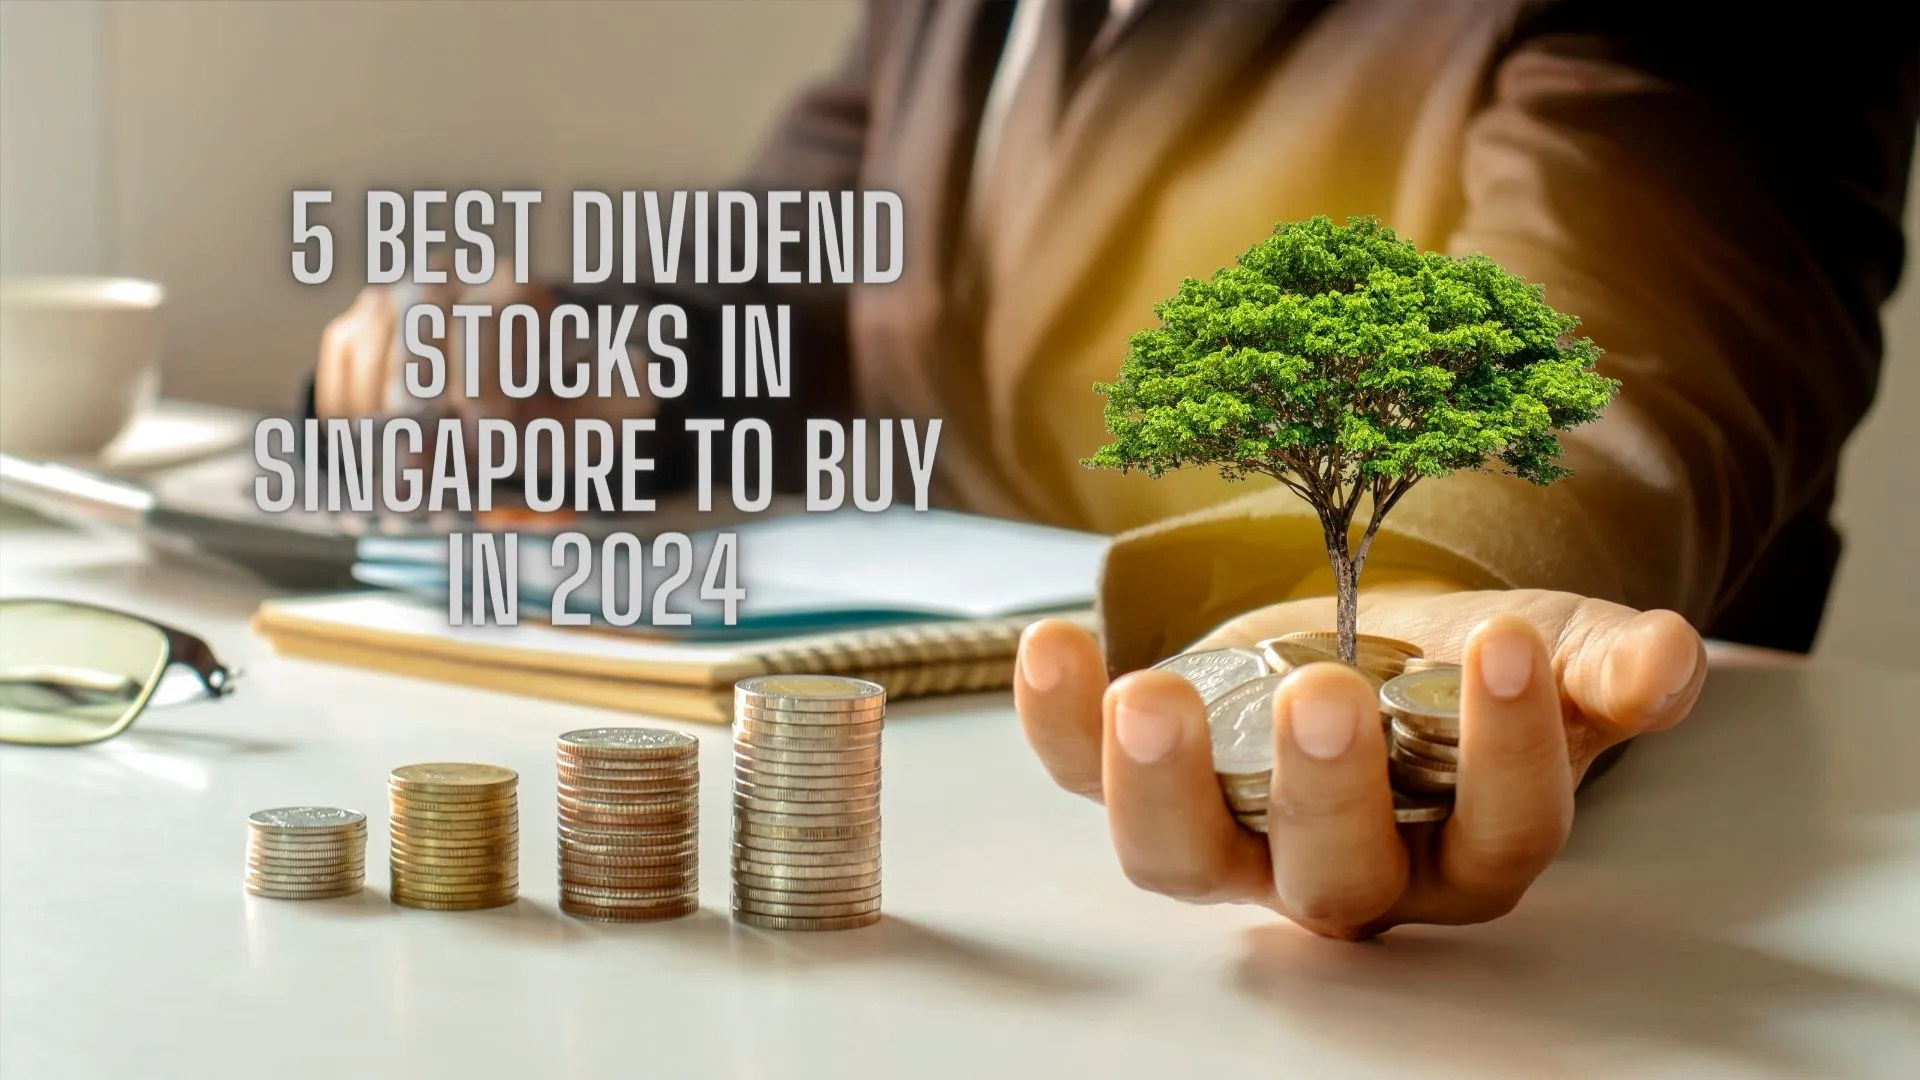 5 Best Dividend Stocks In Singapore To Buy In 2024